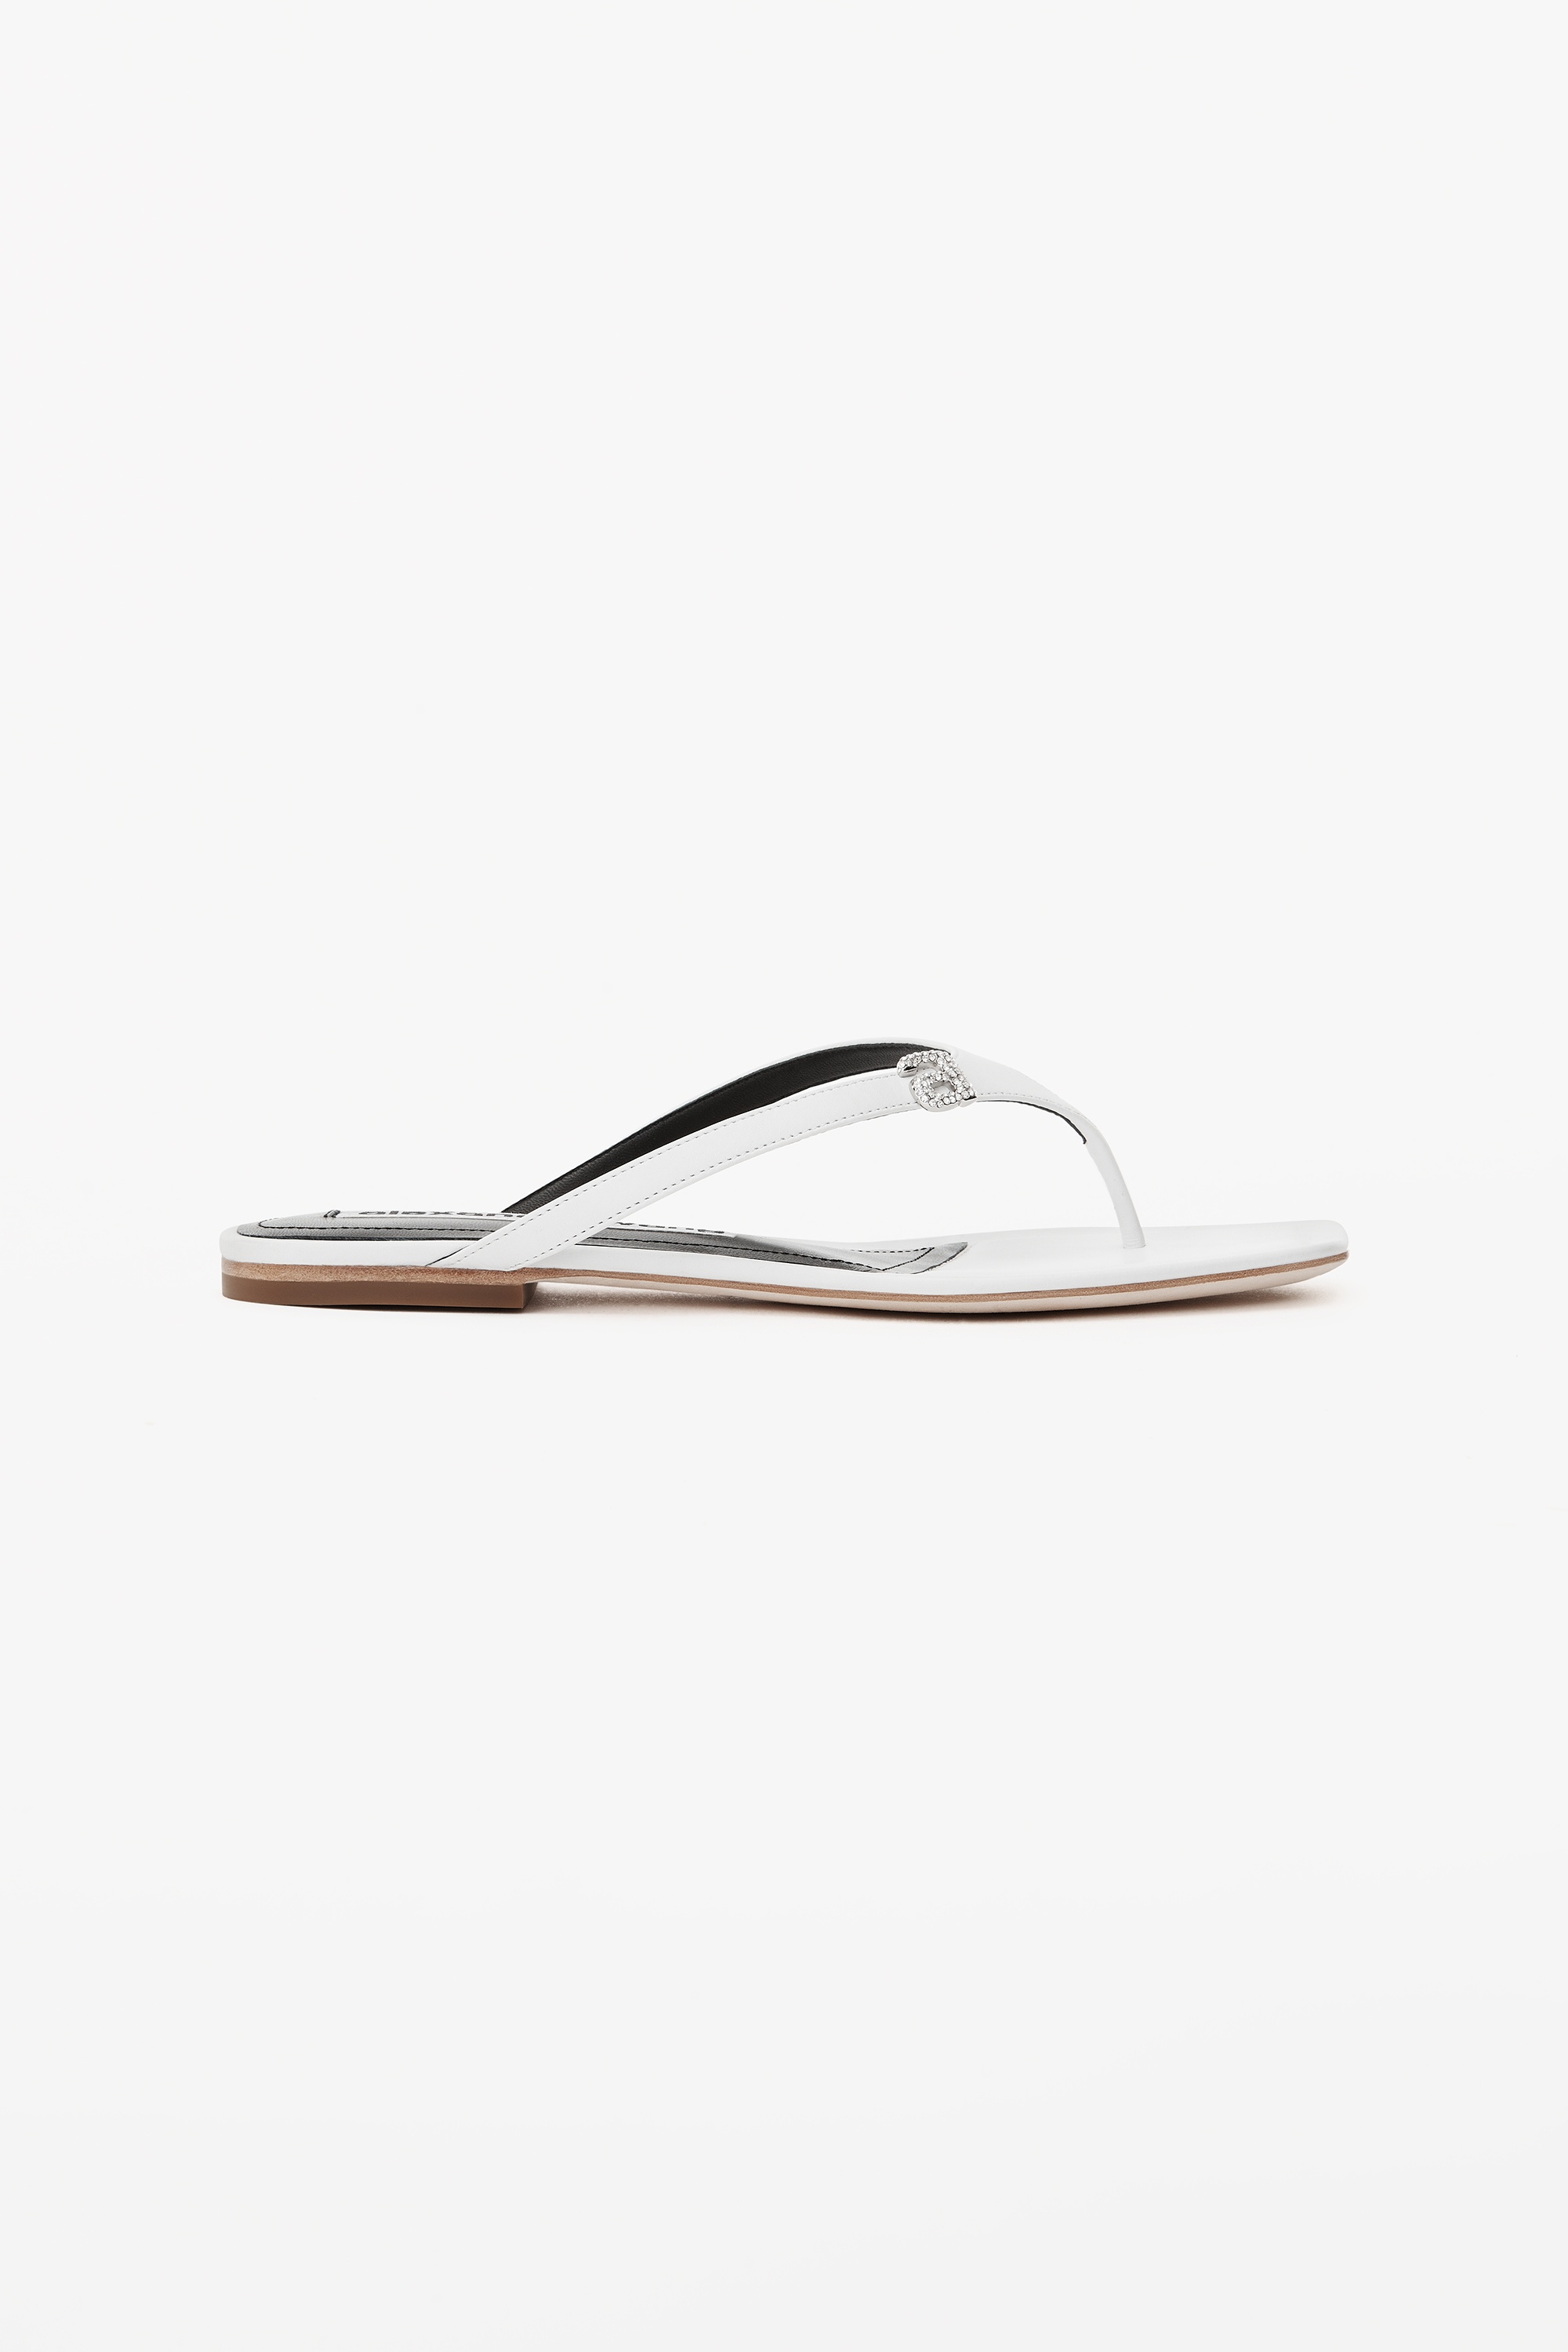 IVY THONG SANDAL IN LEATHER - 1